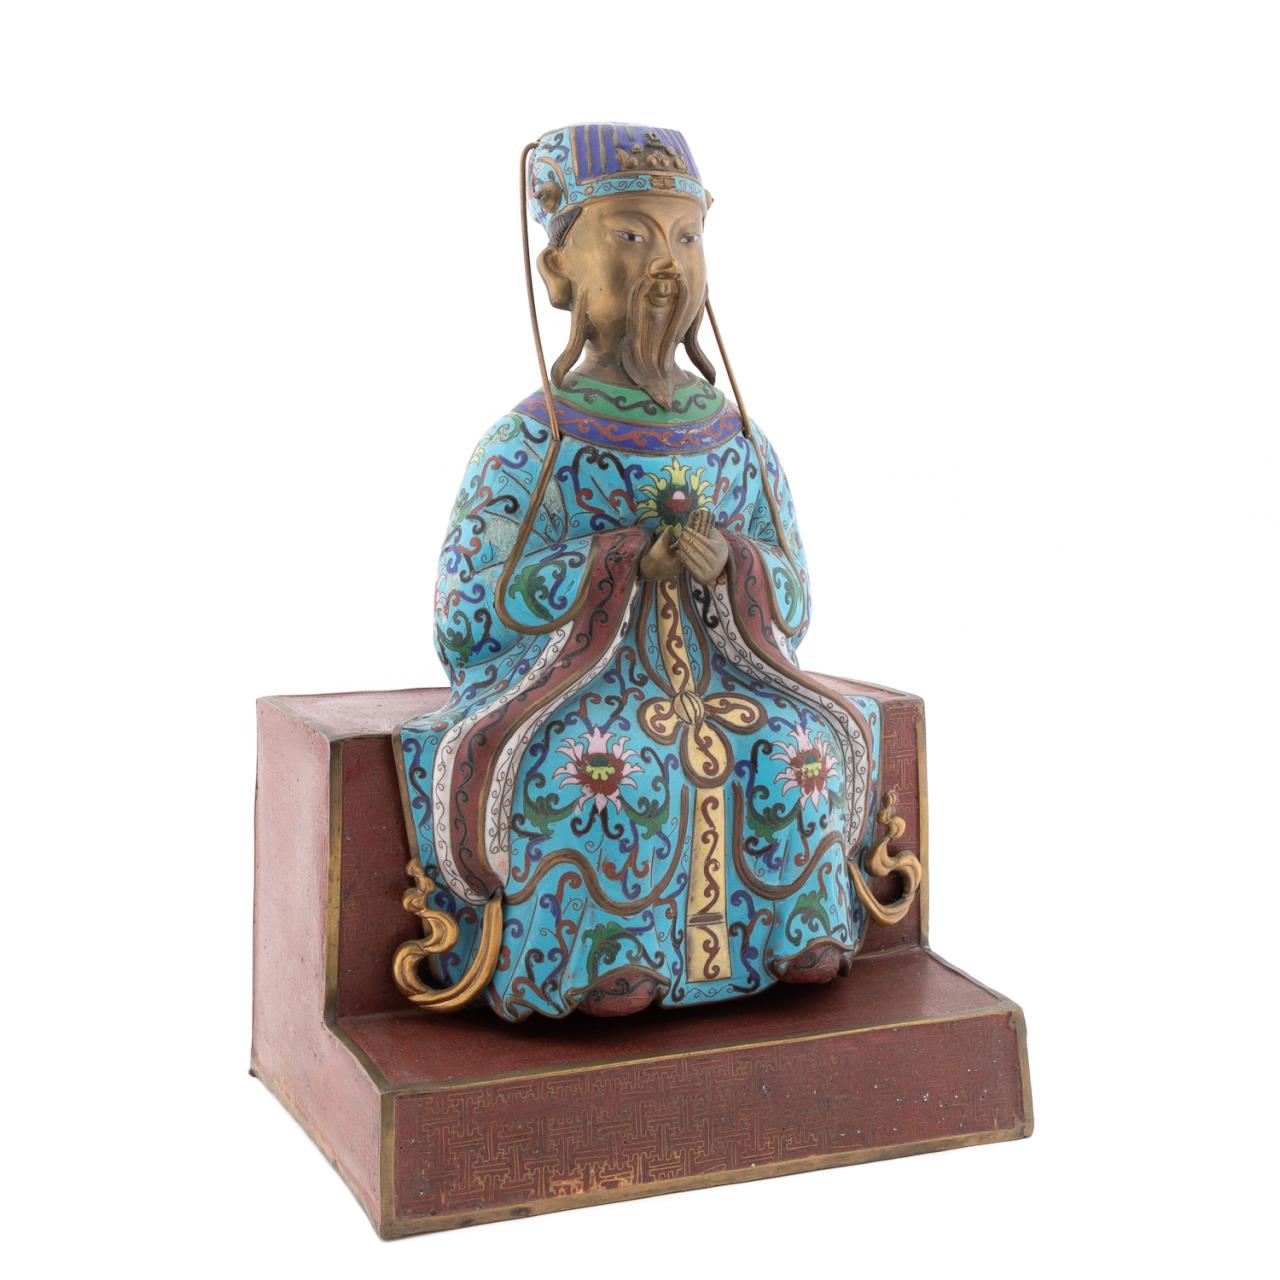 CHINESE CLOISONNE SEATED FIGURE